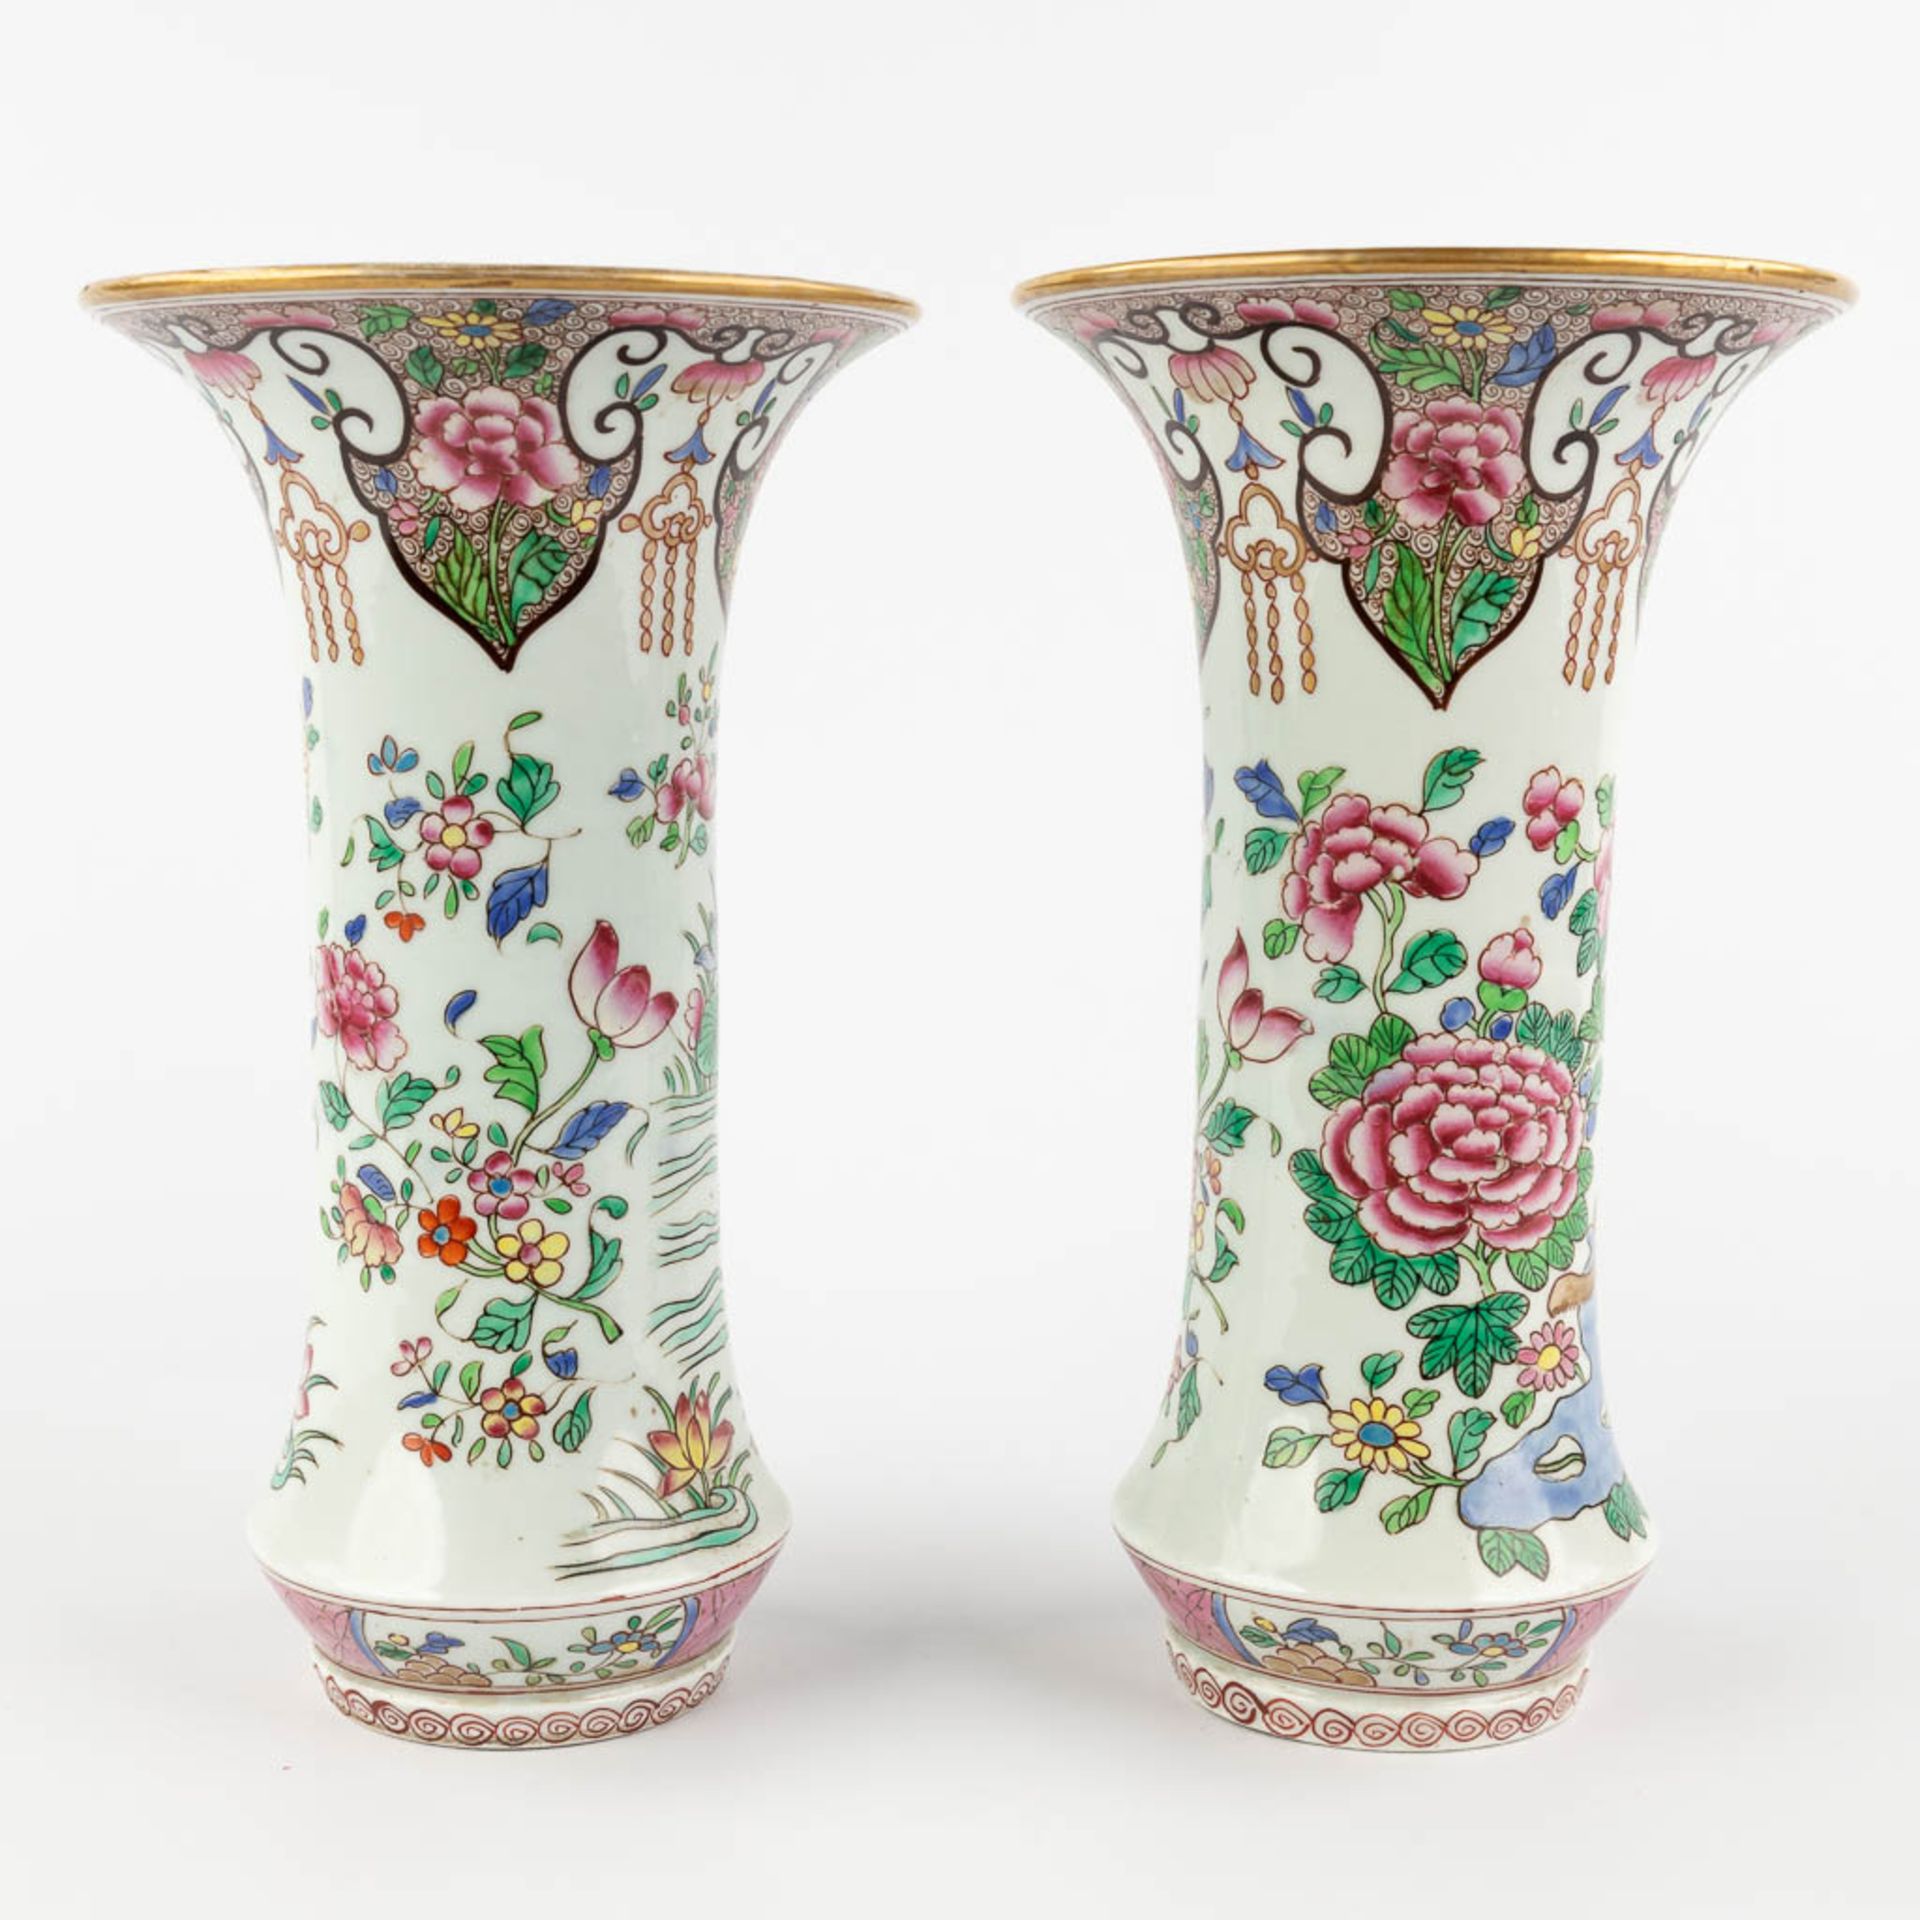 Samson, a 5-piece Kaststel, vases with lid and trumpet vases. Chinoiserie decor. (H:43 x D:21 cm) - Image 18 of 21